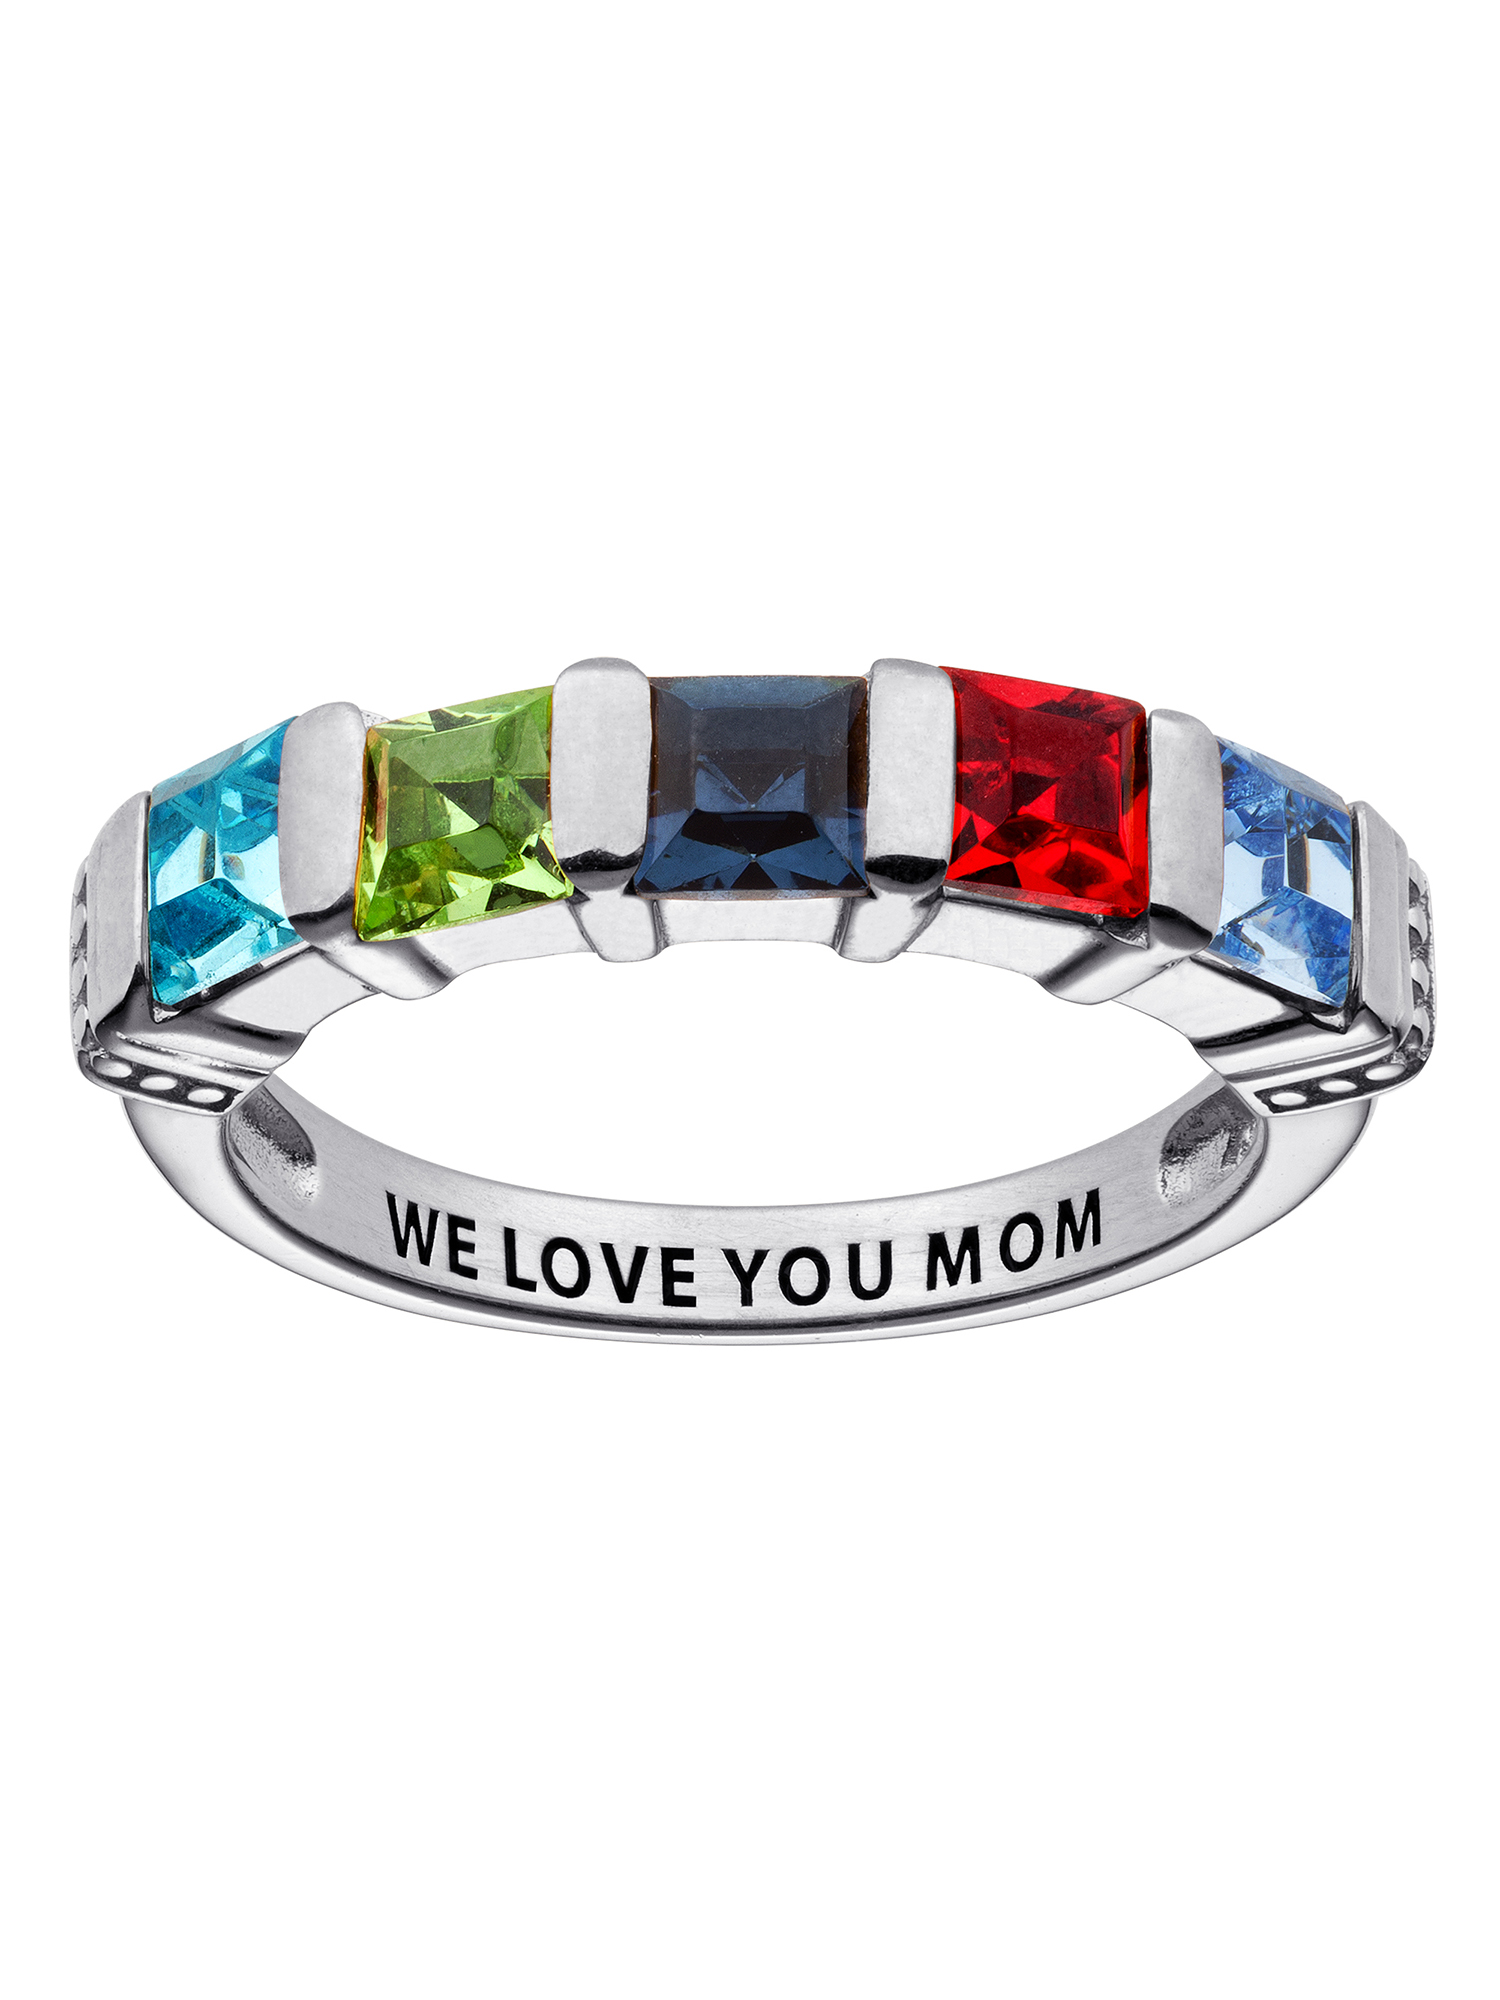 Family Jewelry Personalized Planet Mother's Sterling Silver Square Birthstone Ring 2-5 Stones ,Women's - image 1 of 2